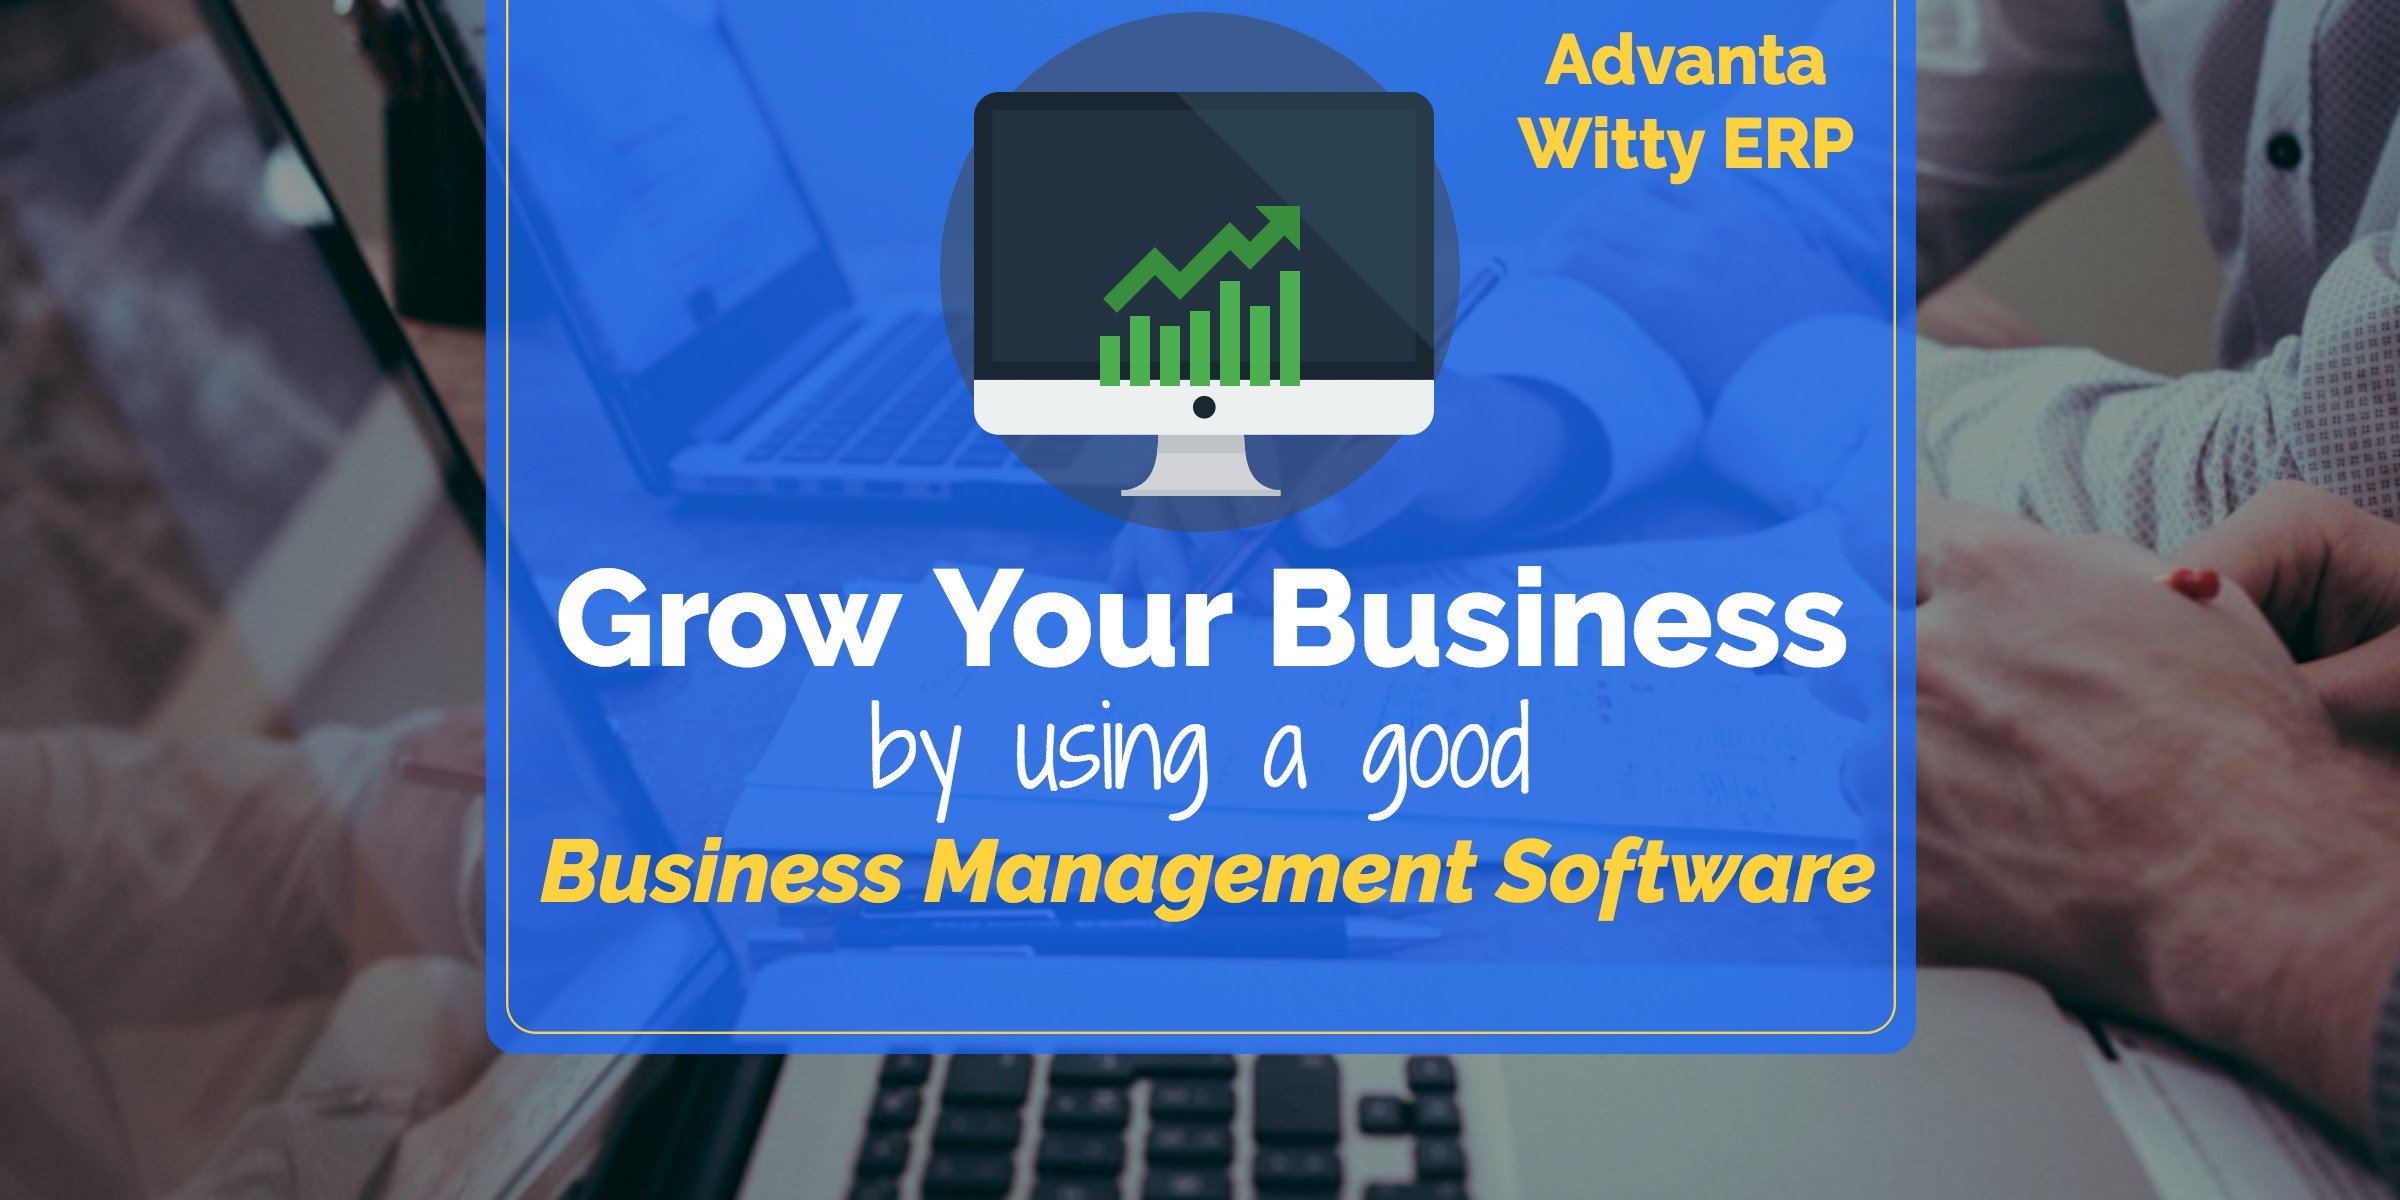 Advanta Witty Business Management System Software